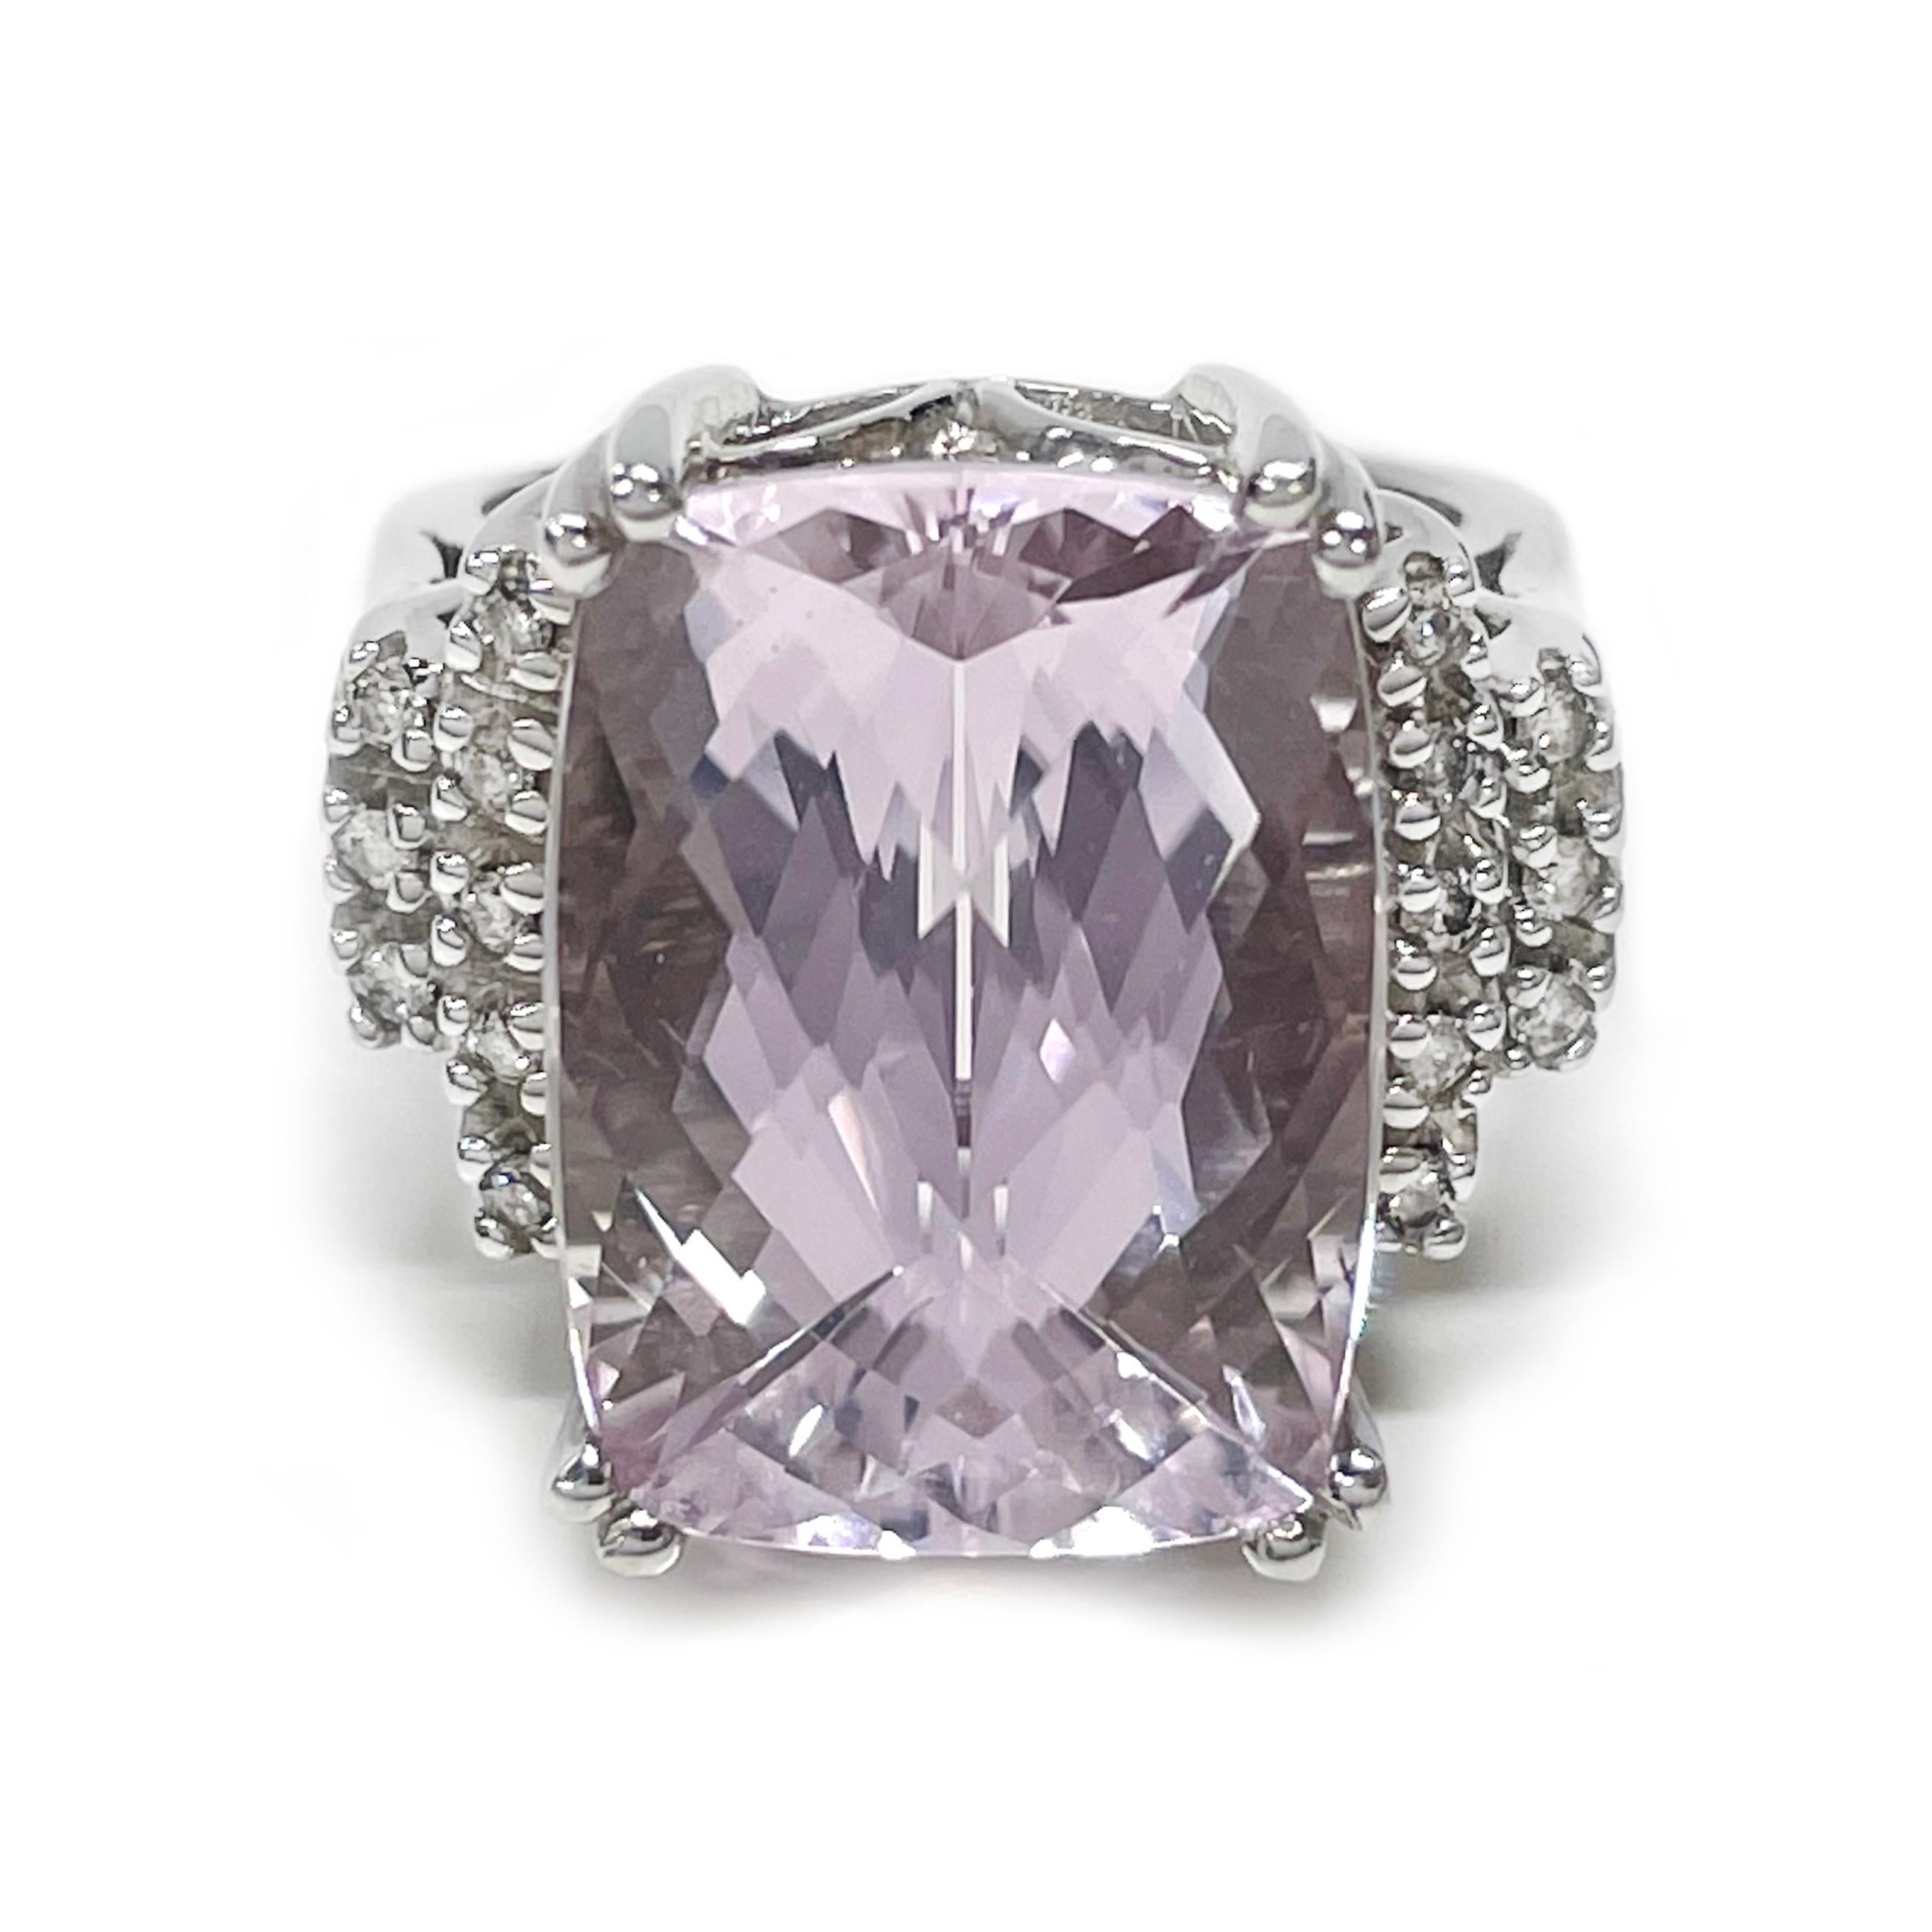 14 Karat White Gold Kunzite Diamond Cocktail Ring. The ring features a large cushion/checkboard-cut Kunzite, 13.8 carat gemstone prong-set on a raised gallery. Eight round side diamonds adorn either side. The wide band slightly tapers. The ring size